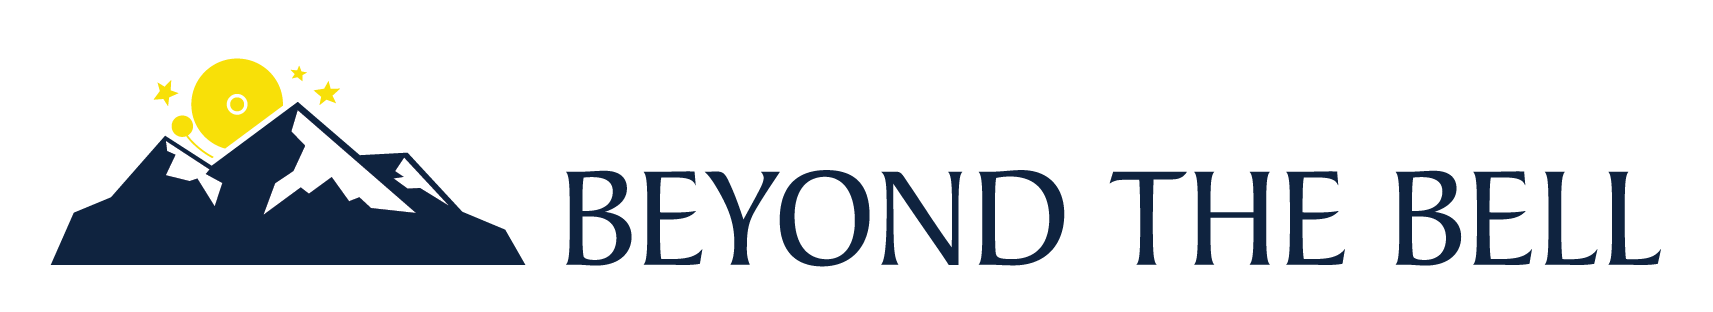 Beyond the Bell logo and title